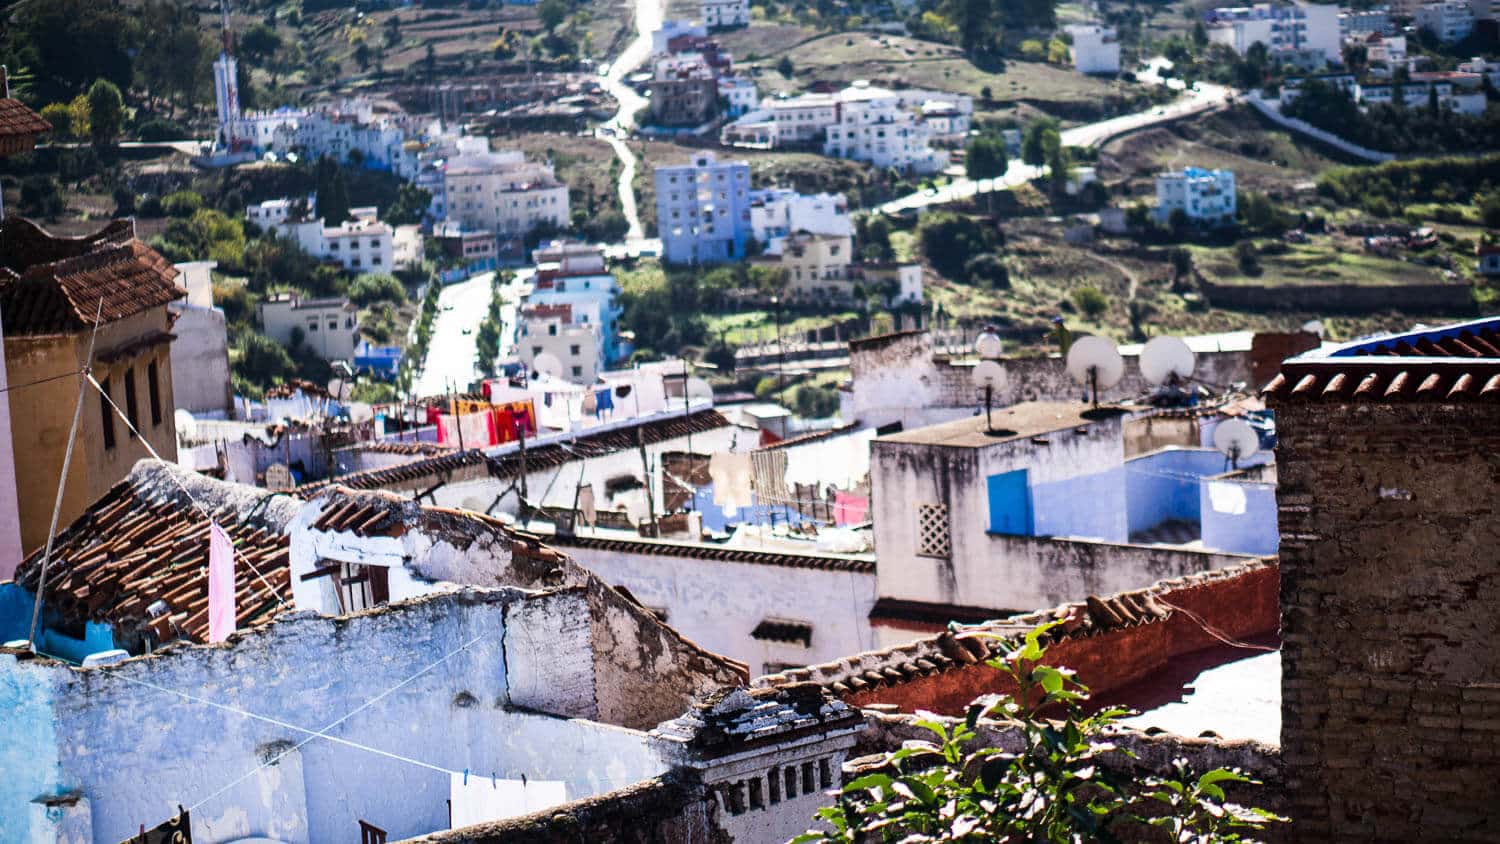 view over the roofs of Chefchouen, the blue city in Morocco